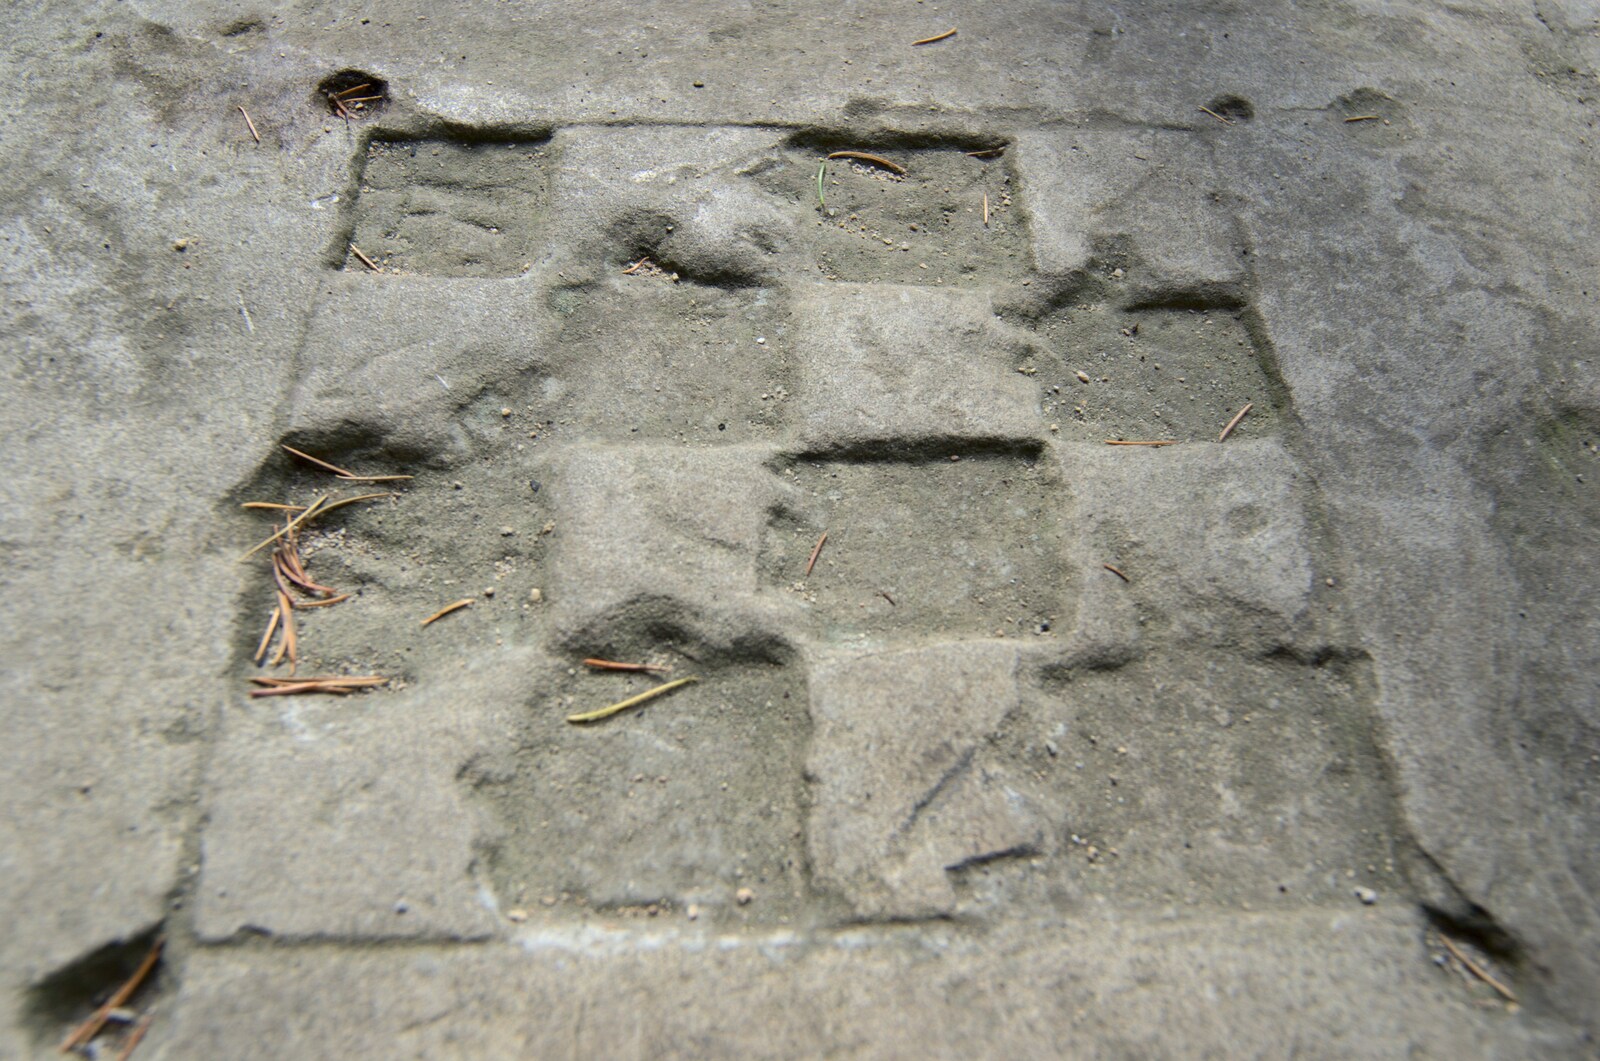 A rudimentary gaming board, carved in to stone from A Camper Van Odyssey: Oxford, Salisbury, New Forest and Barton-on-Sea - 19th June 2011